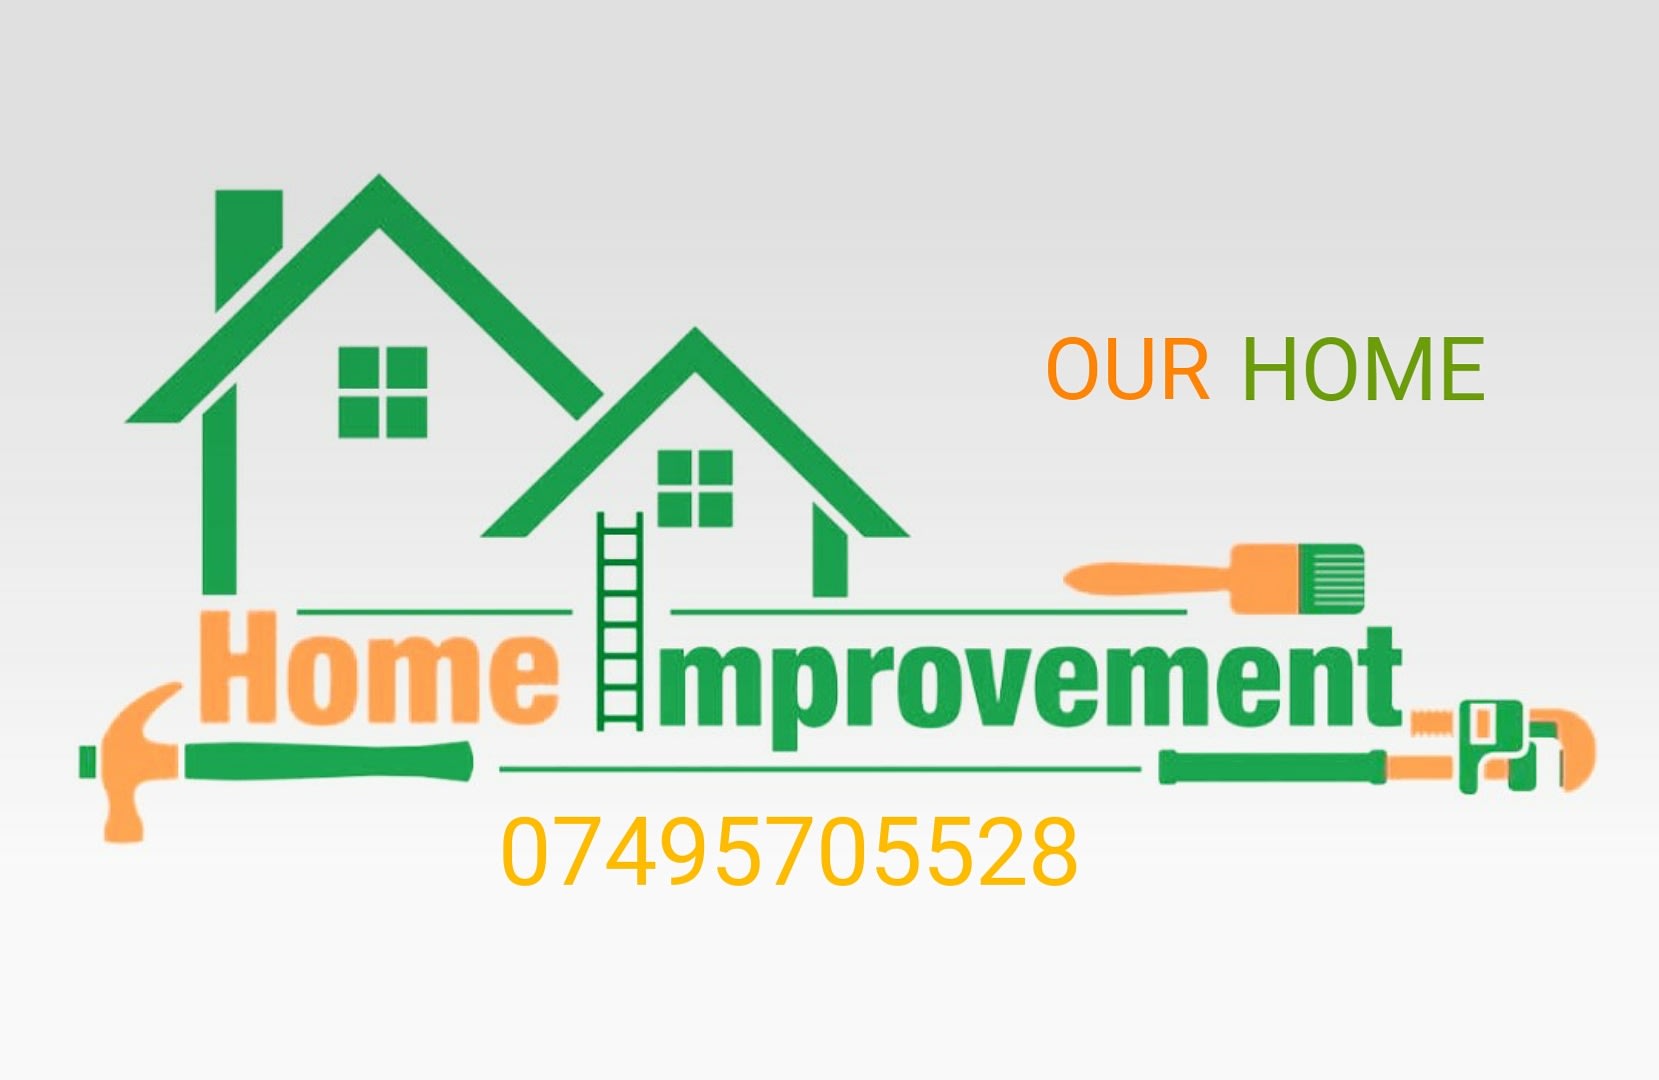 Our Home Improvements